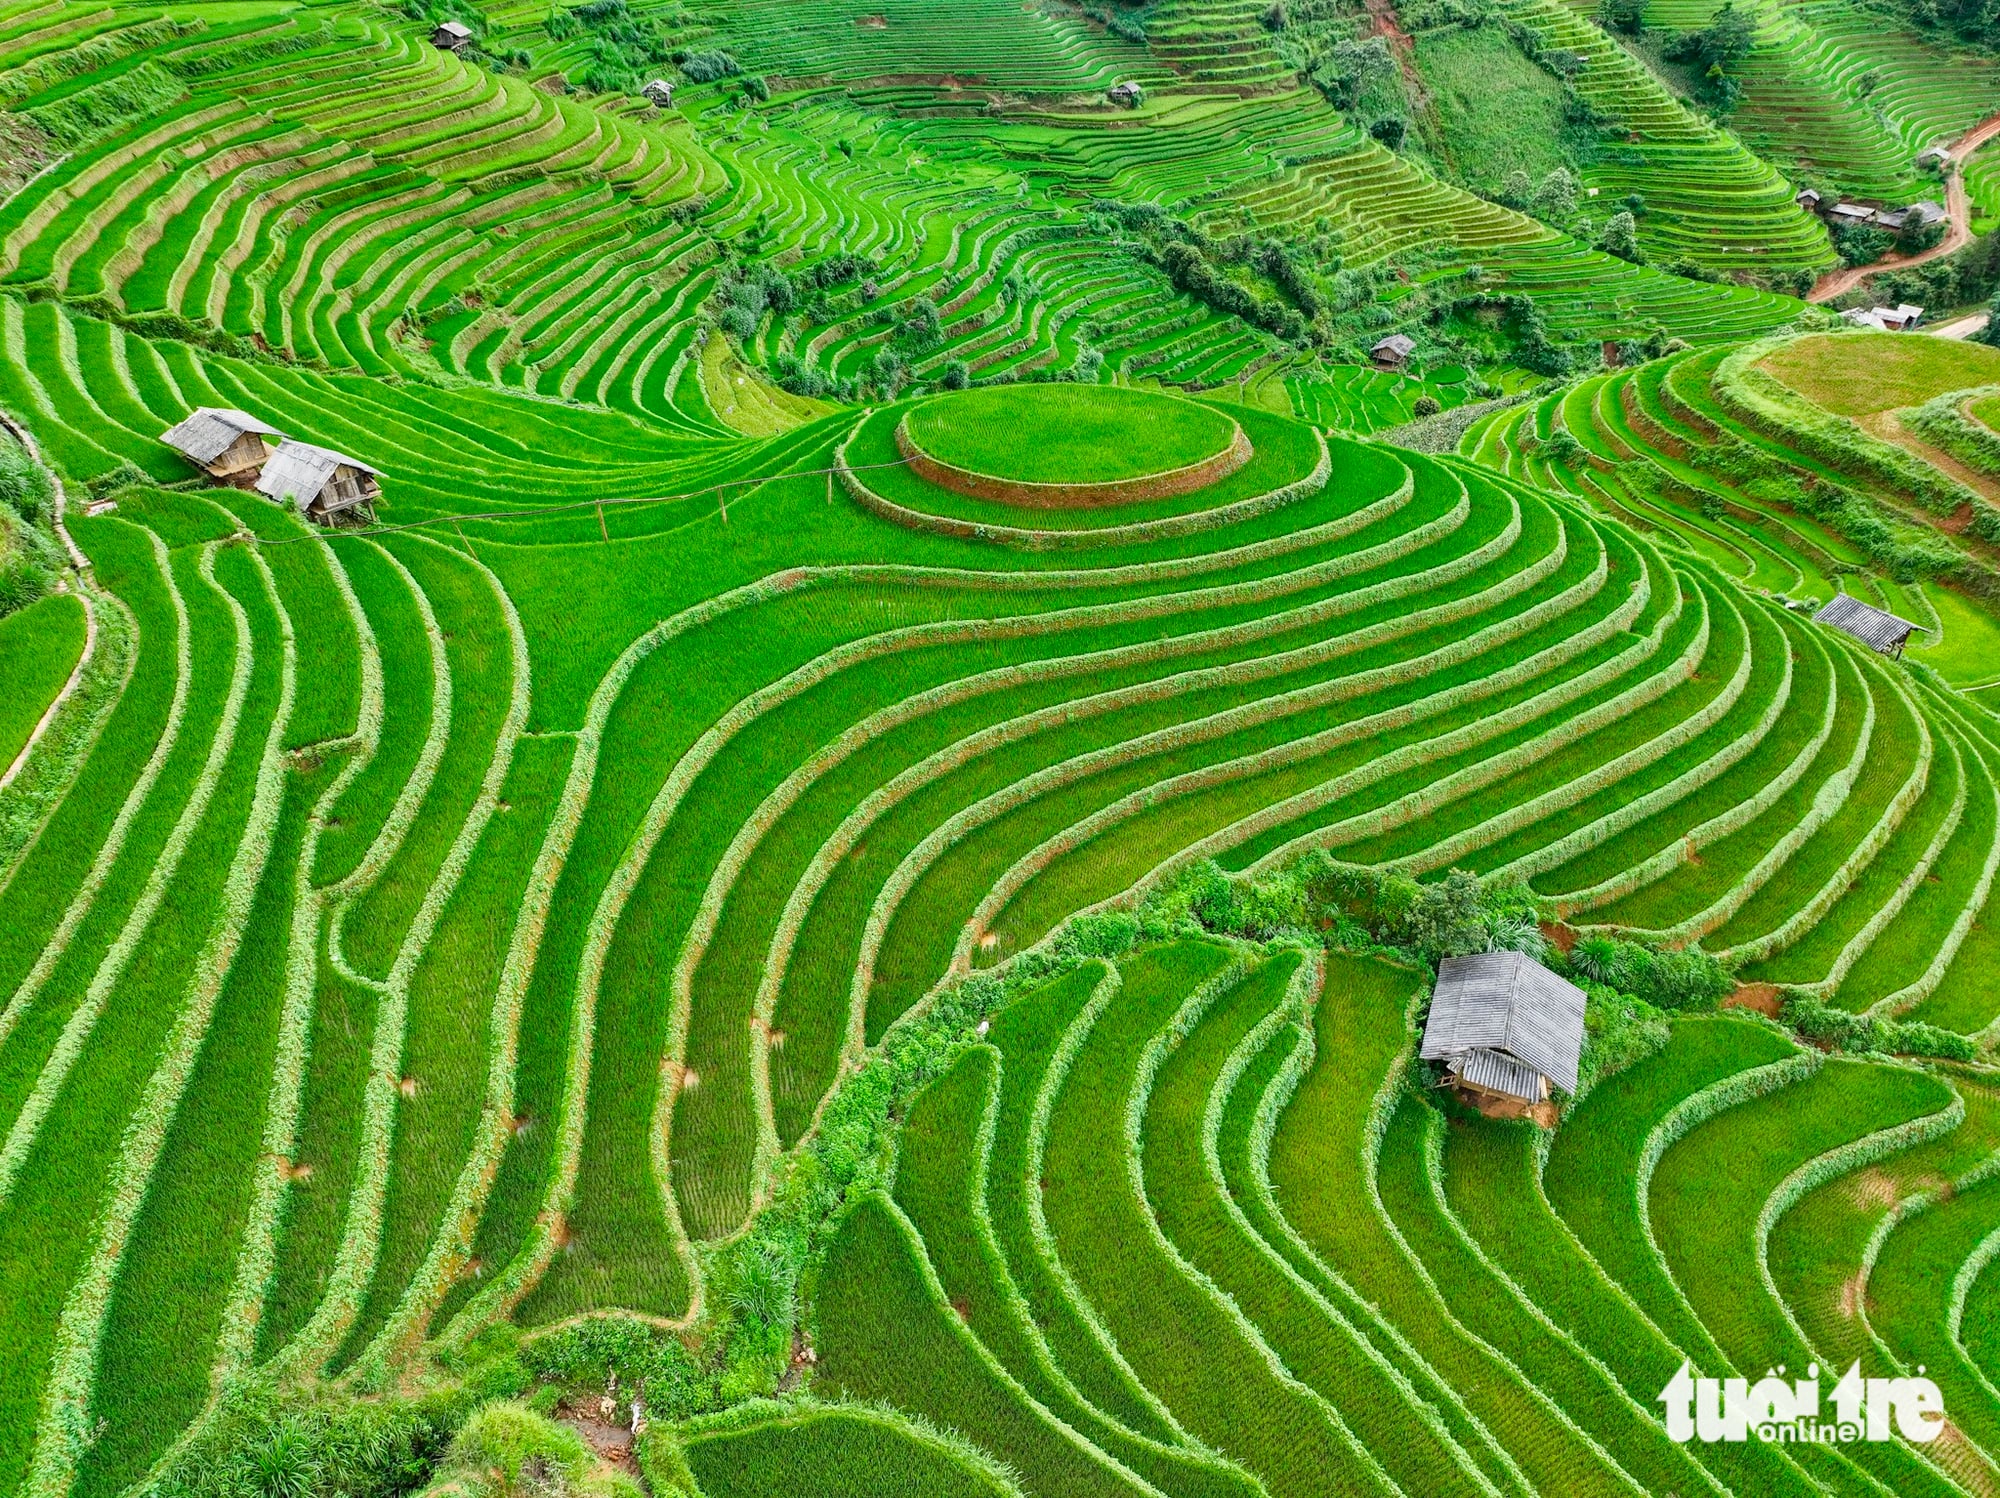 What’s not to be missed while traveling to Vietnam?